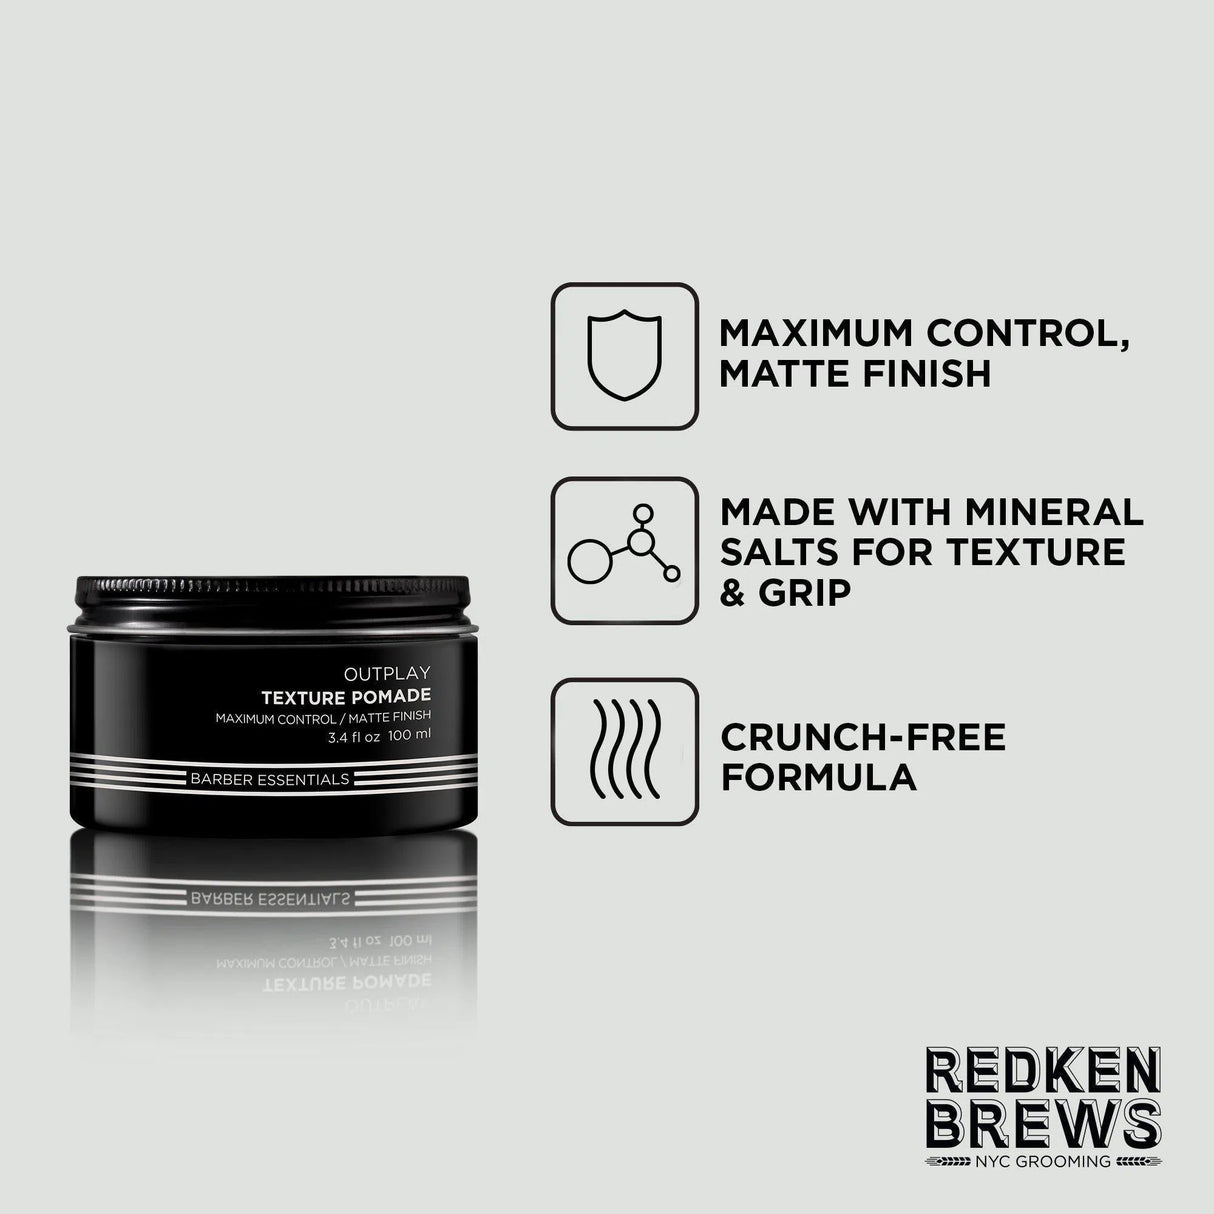 Outplay Texture Pomade